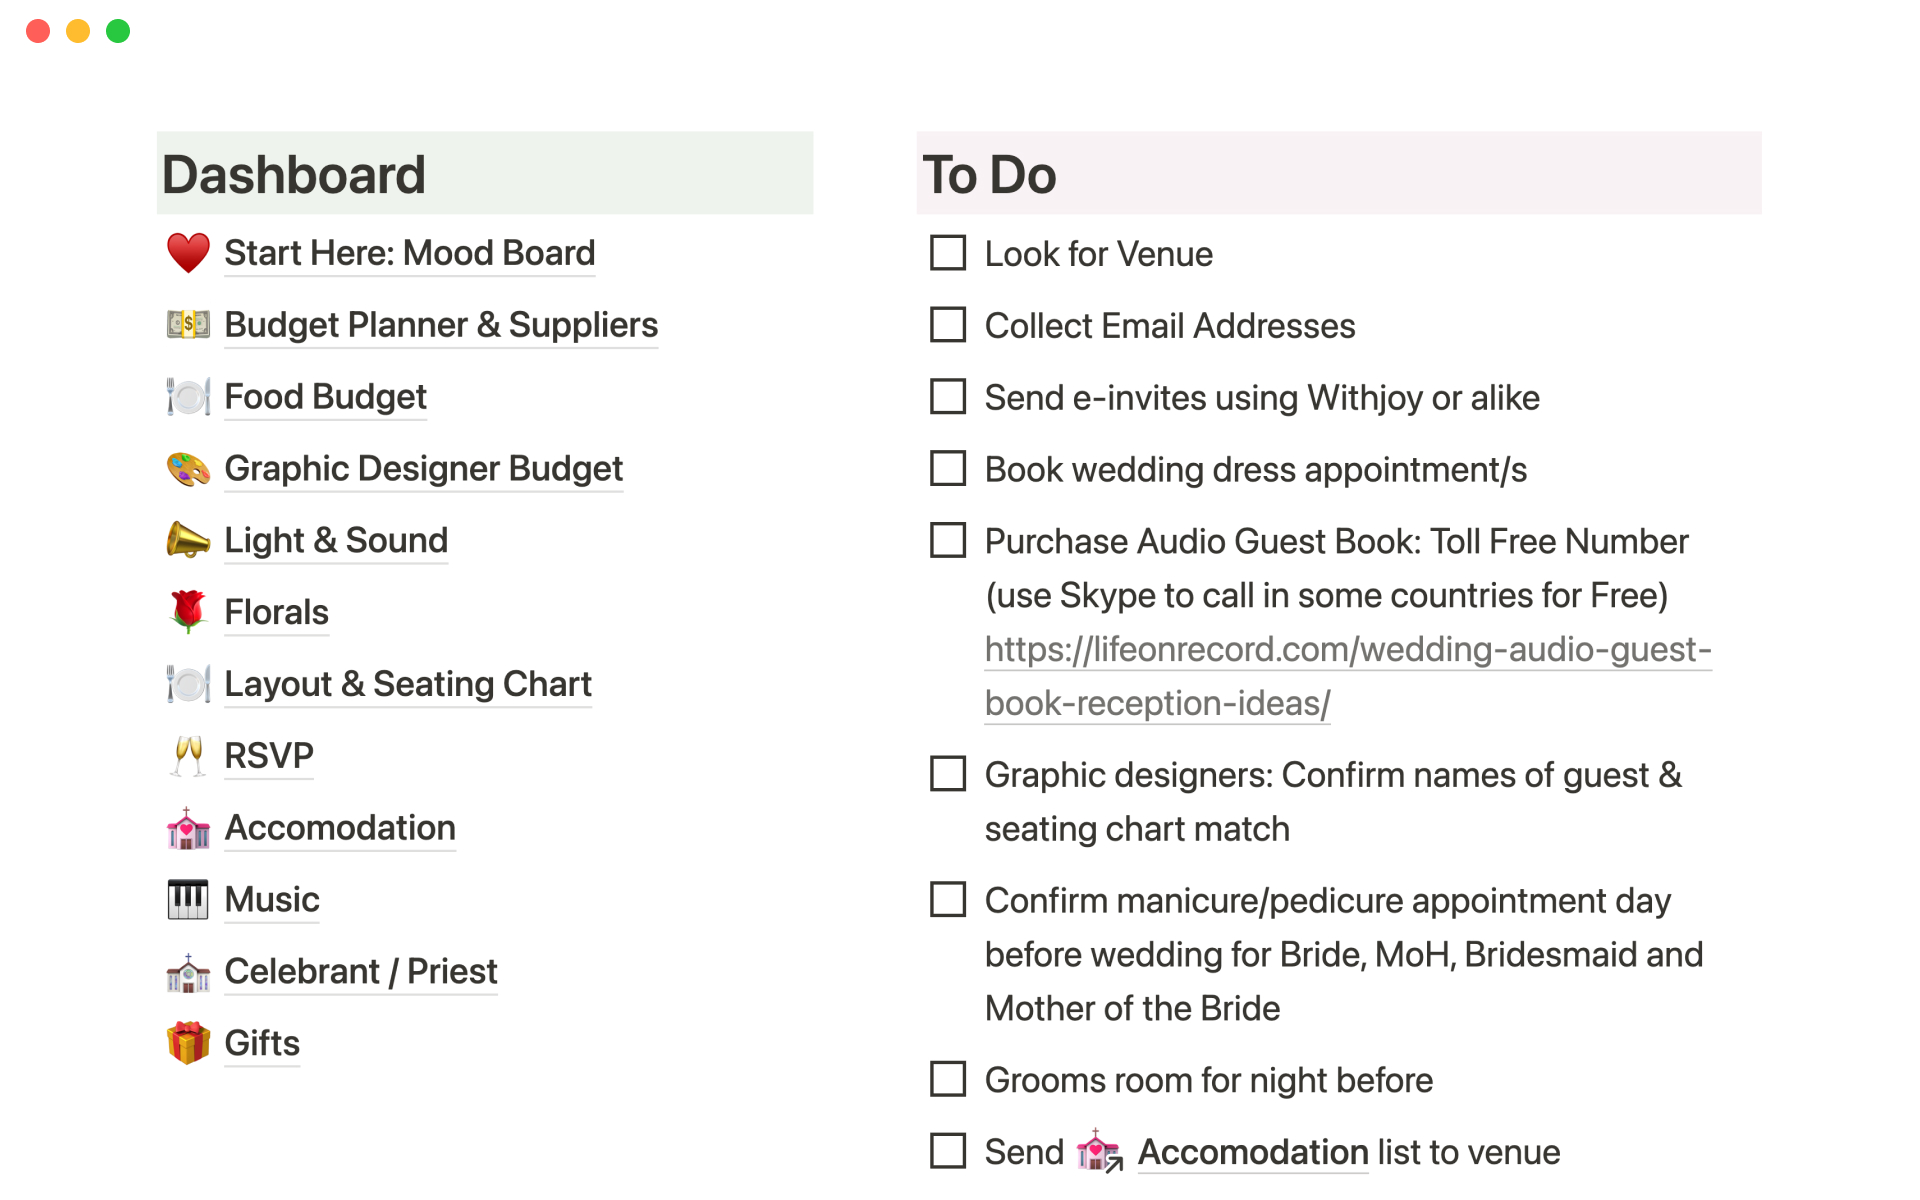 Simple, one page template to plan a wedding locally or overseas.